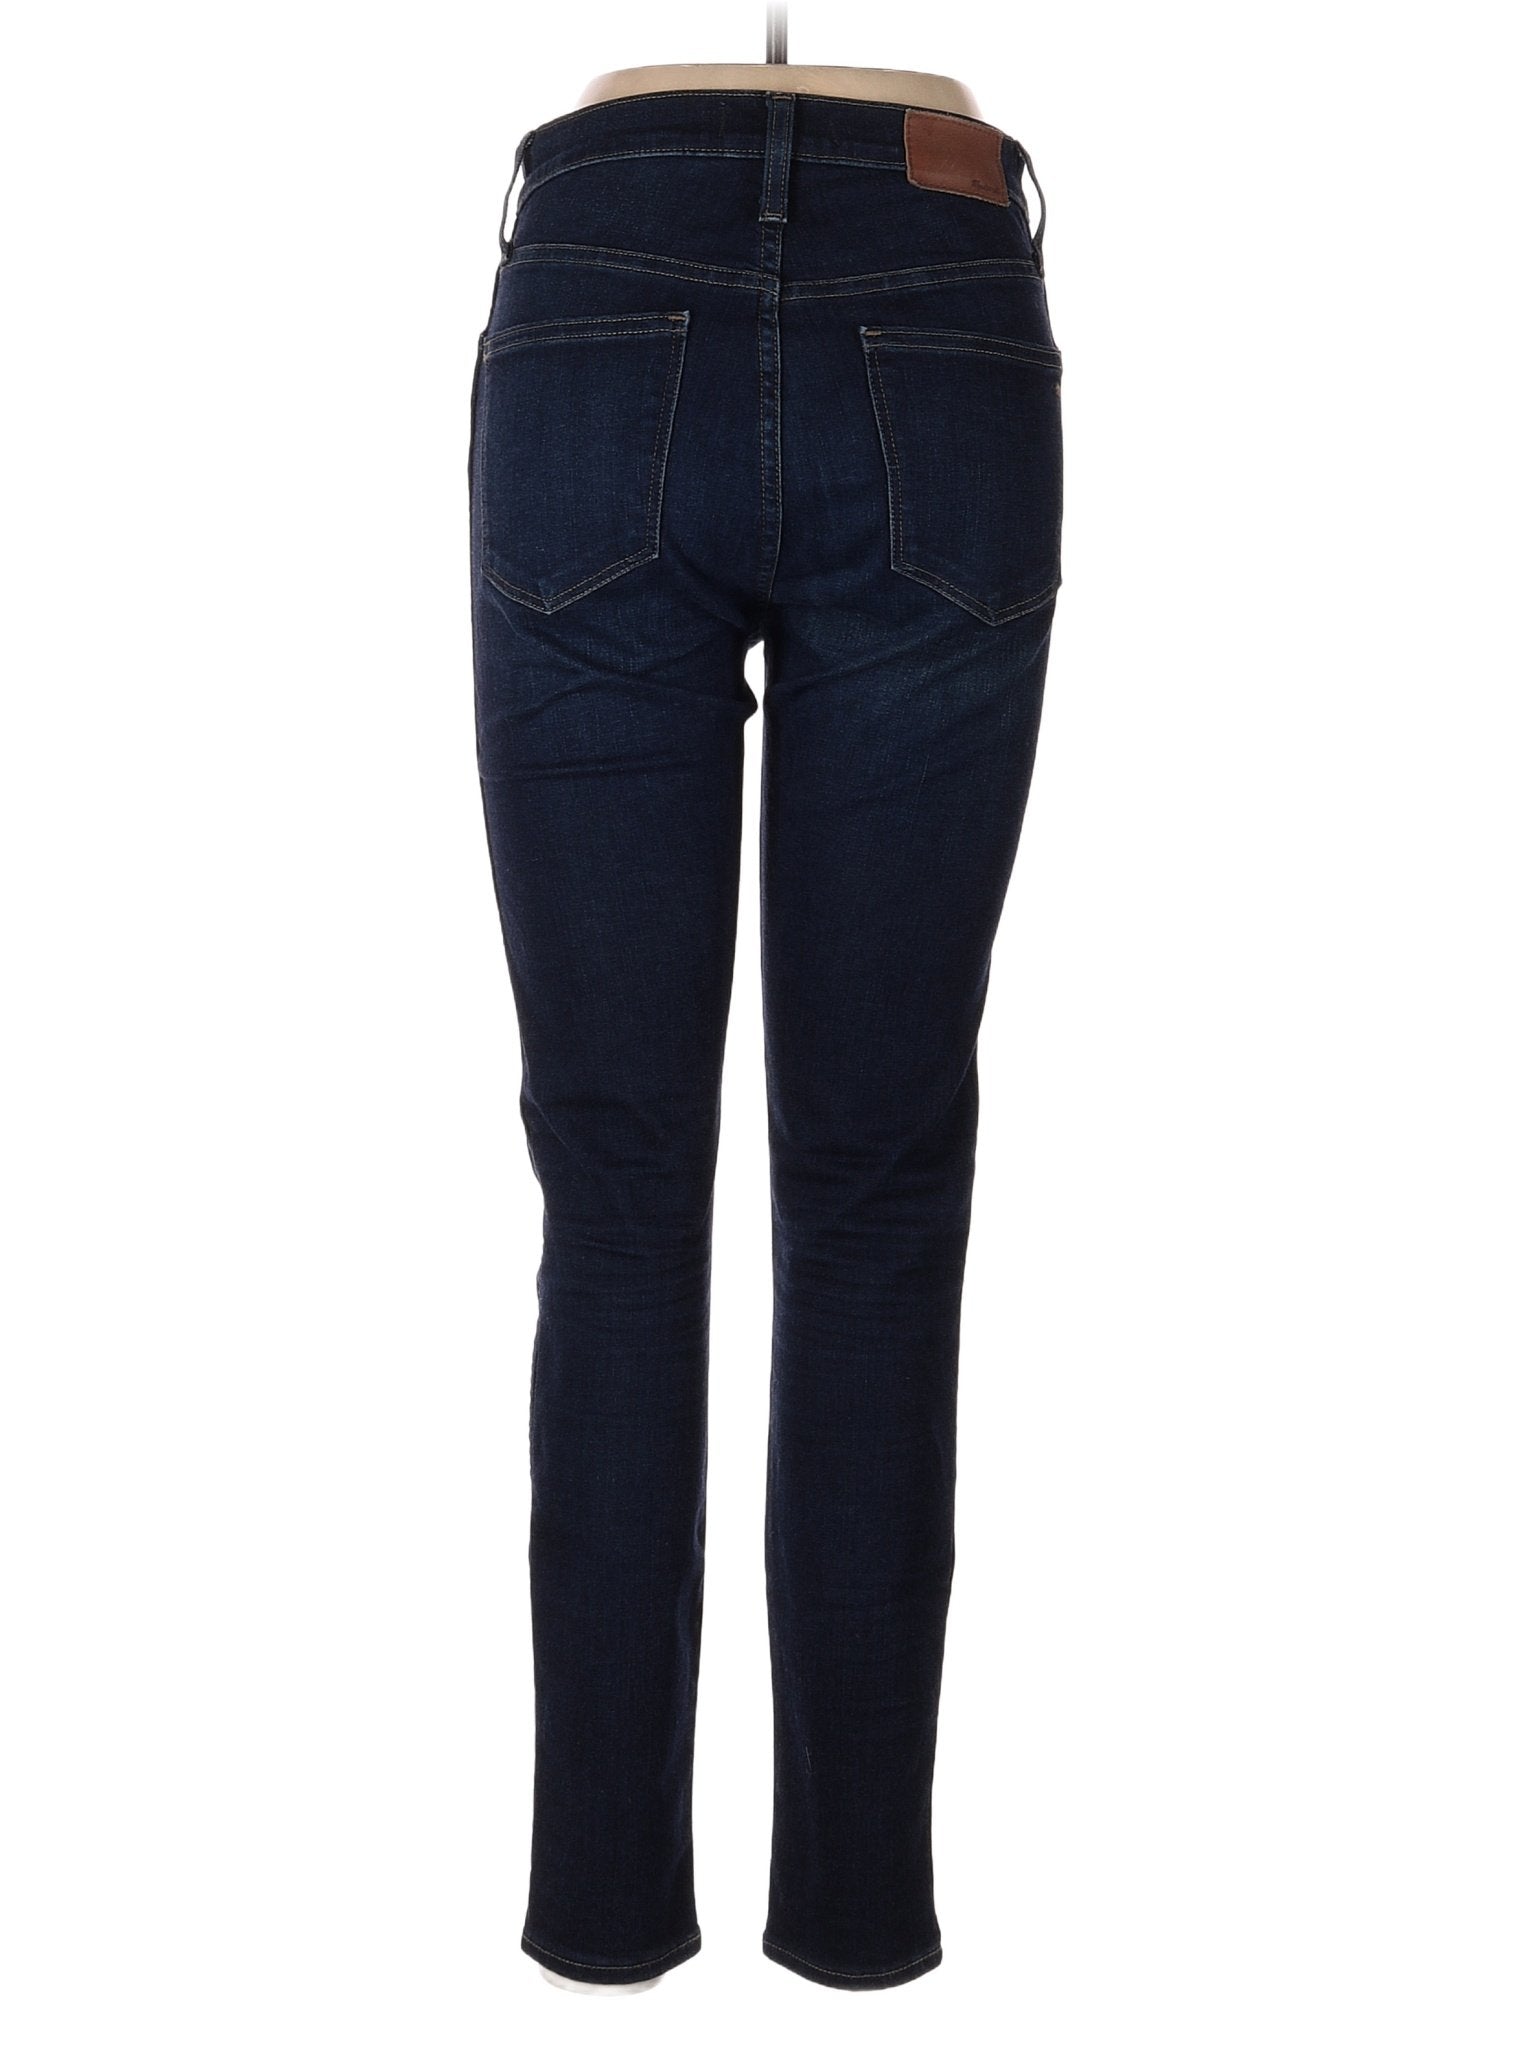 High-Rise Skinny 10" High-Rise Skinny Jeans In Hayes Wash in Dark Wash waist size - 28